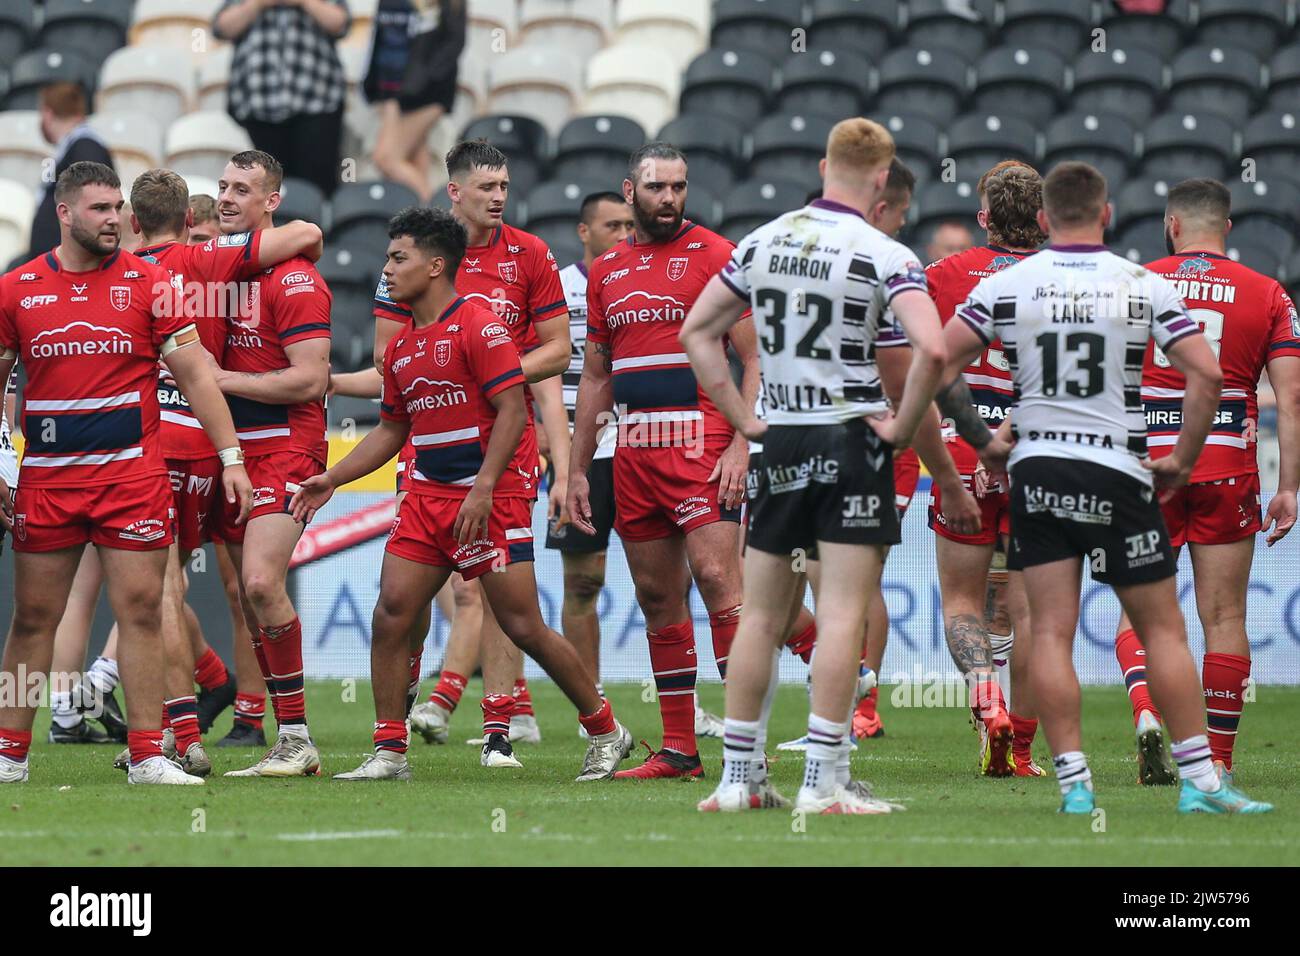 Hull KR players celebrate while Hull FC players can only stand and watch after the Betfred Super League match Hull FC vs Hull KR at MKM Stadium, Hull, United Kingdom, 3rd September